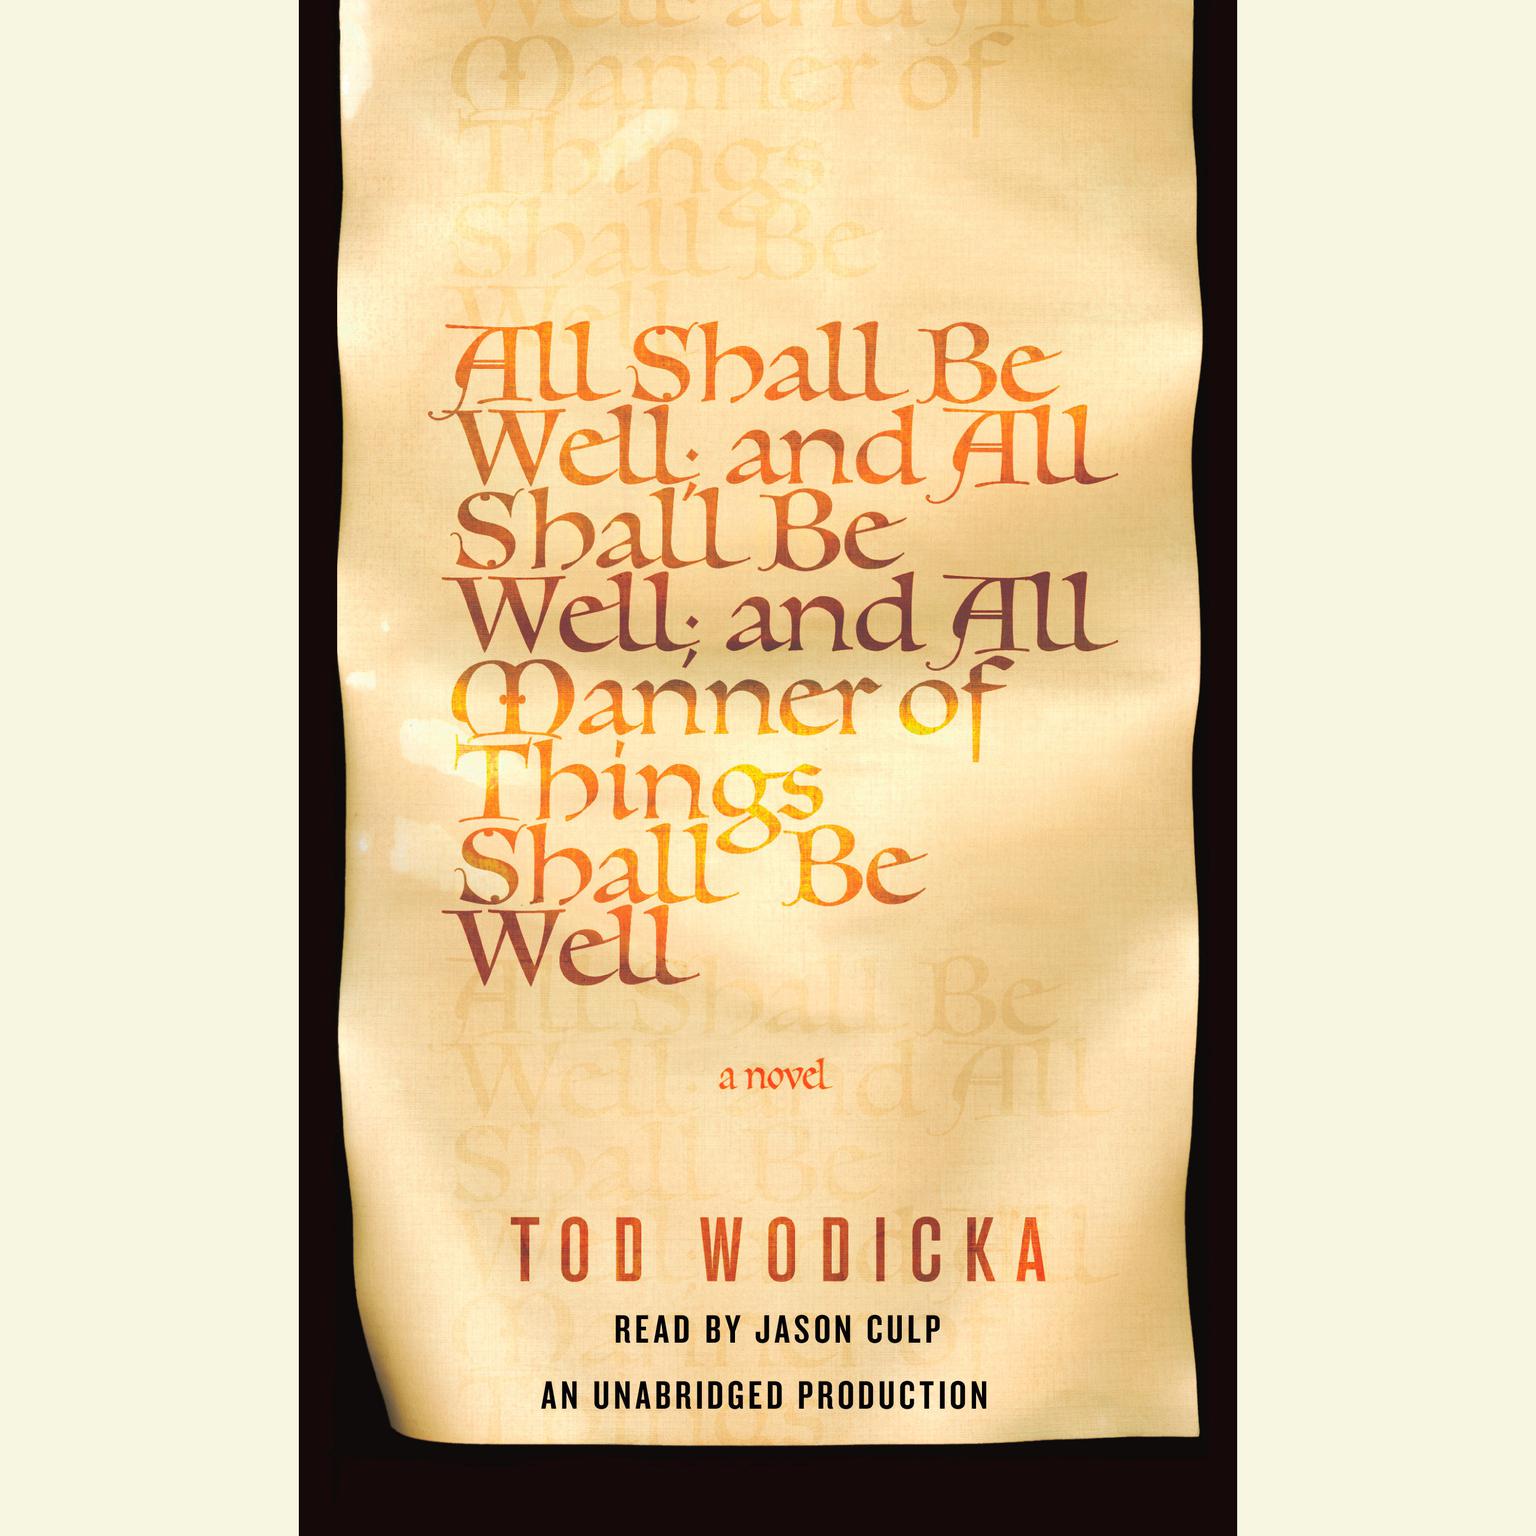 All Shall Be Well; And All Shall Be Well; And All Manner of Things Shall Be Well: A Novel Audiobook, by Tod Wodicka